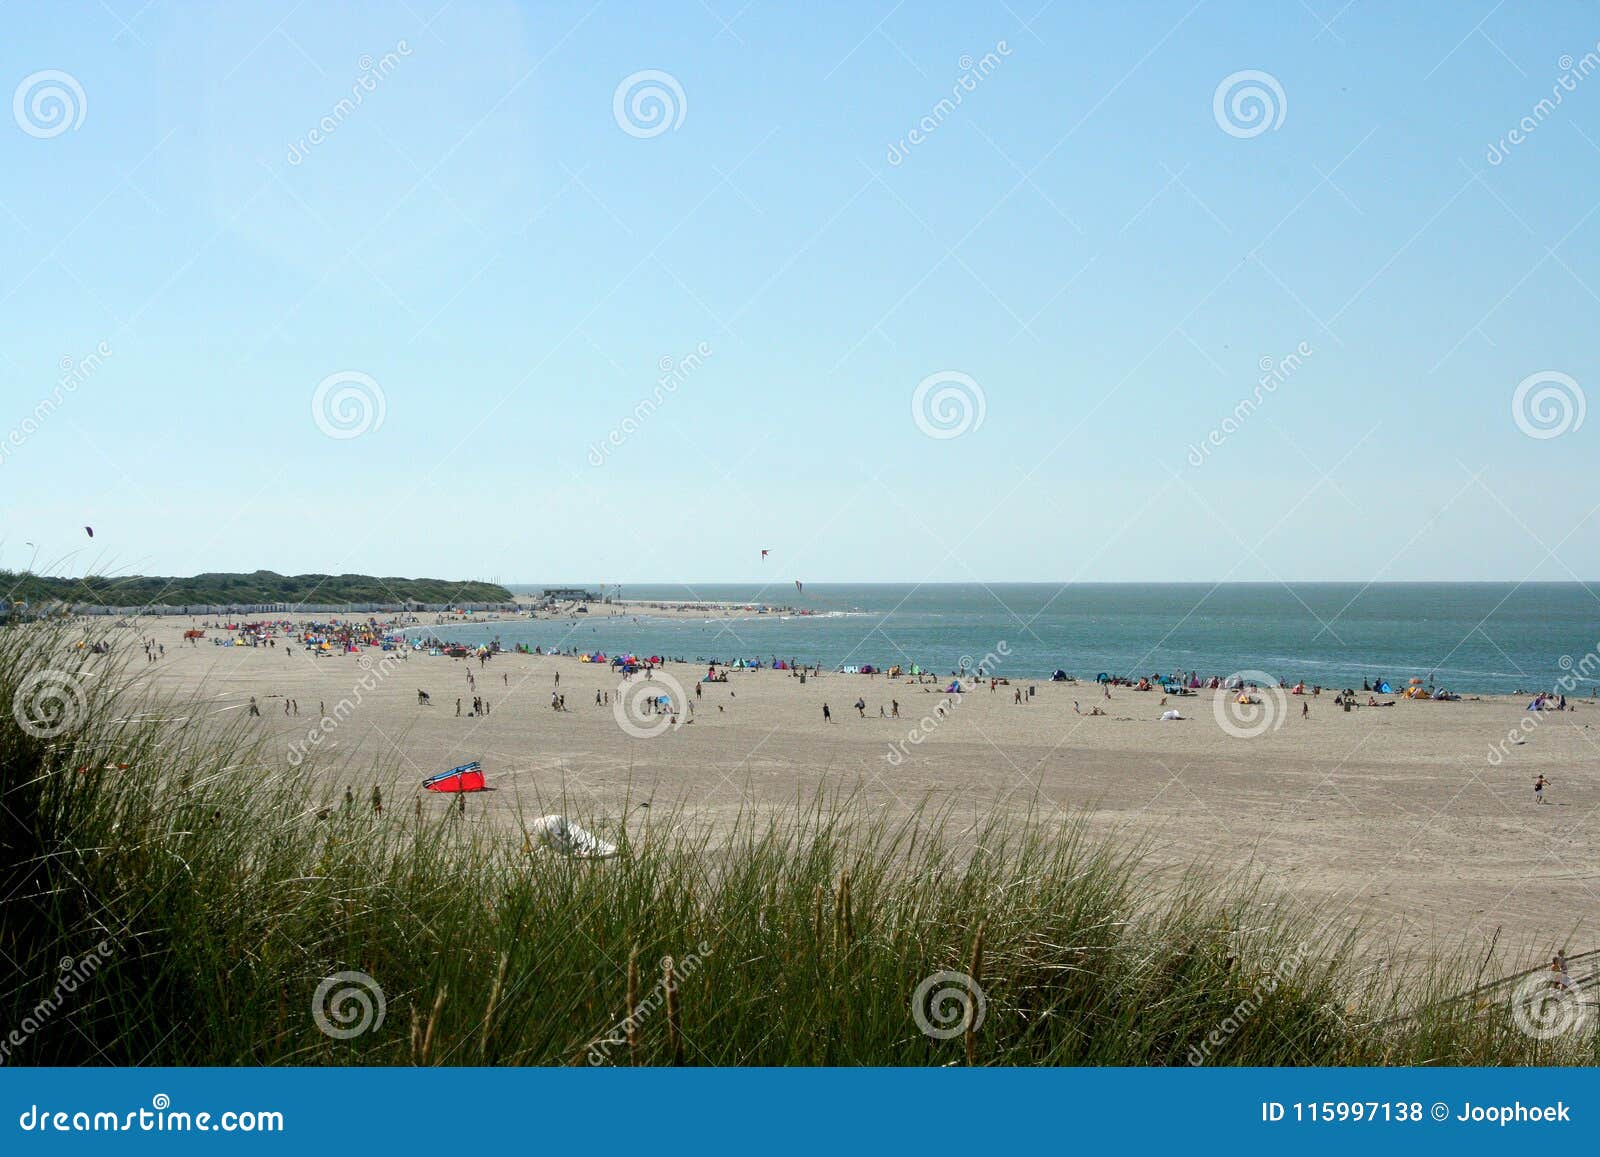 People Having Fun with Recreation and Leisure Stock Photo - Image of ...